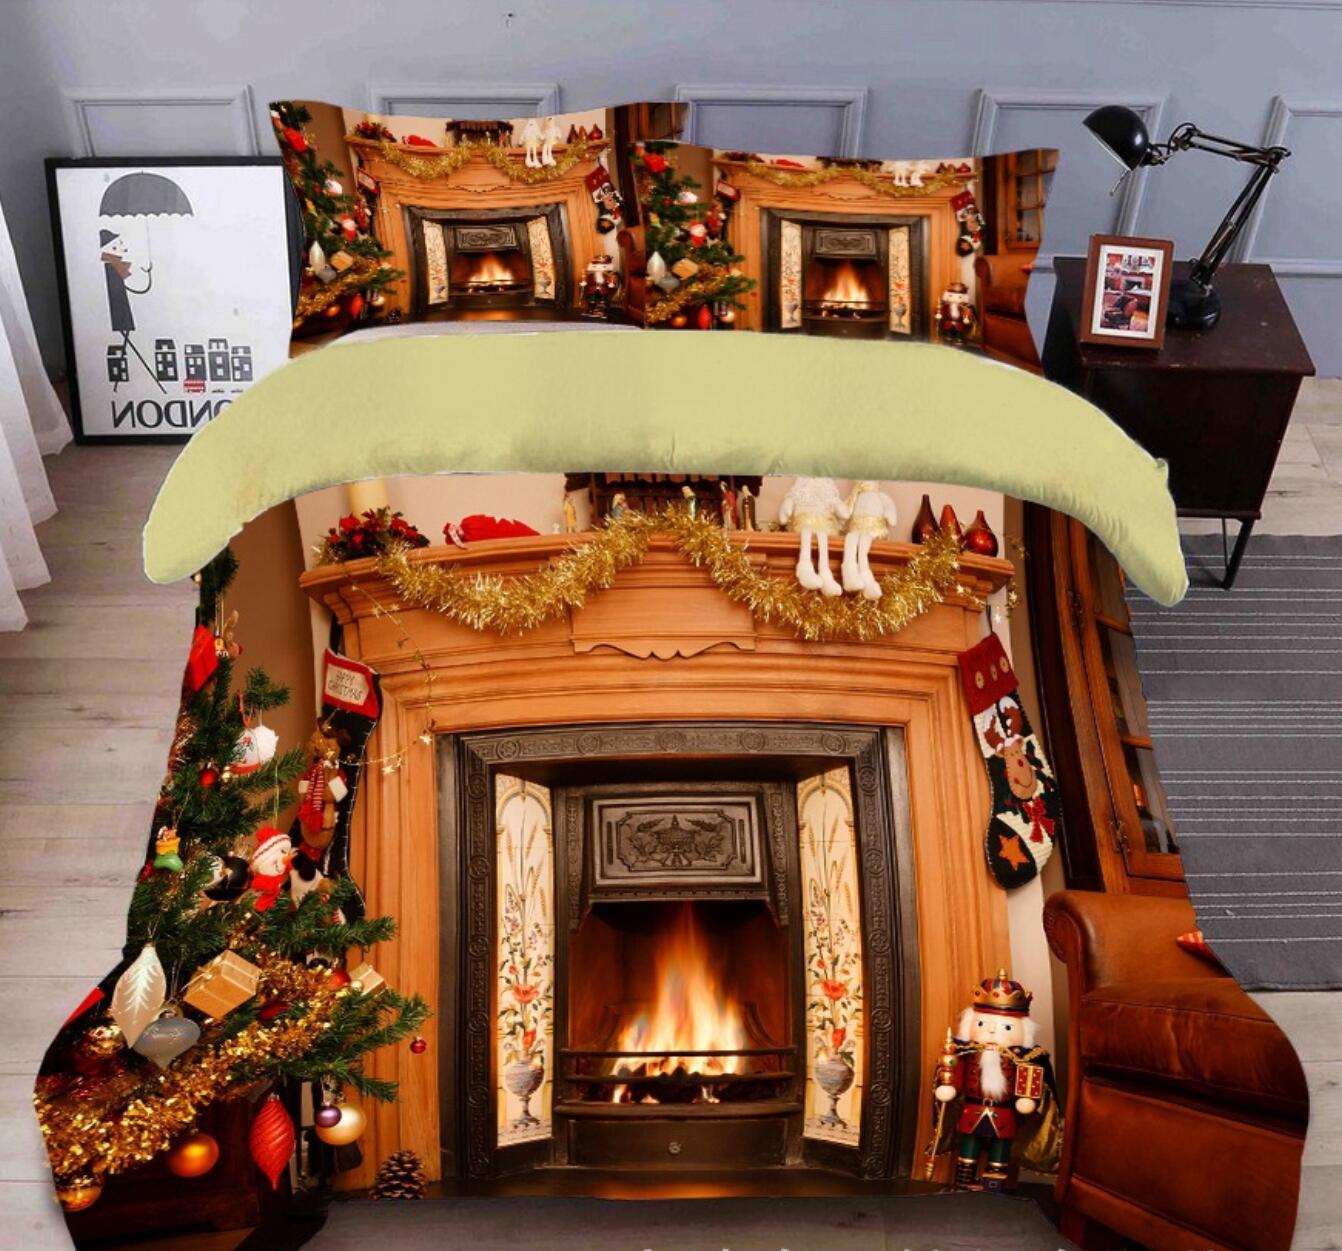 3D Fireplace 31238 Christmas Quilt Duvet Cover Xmas Bed Pillowcases